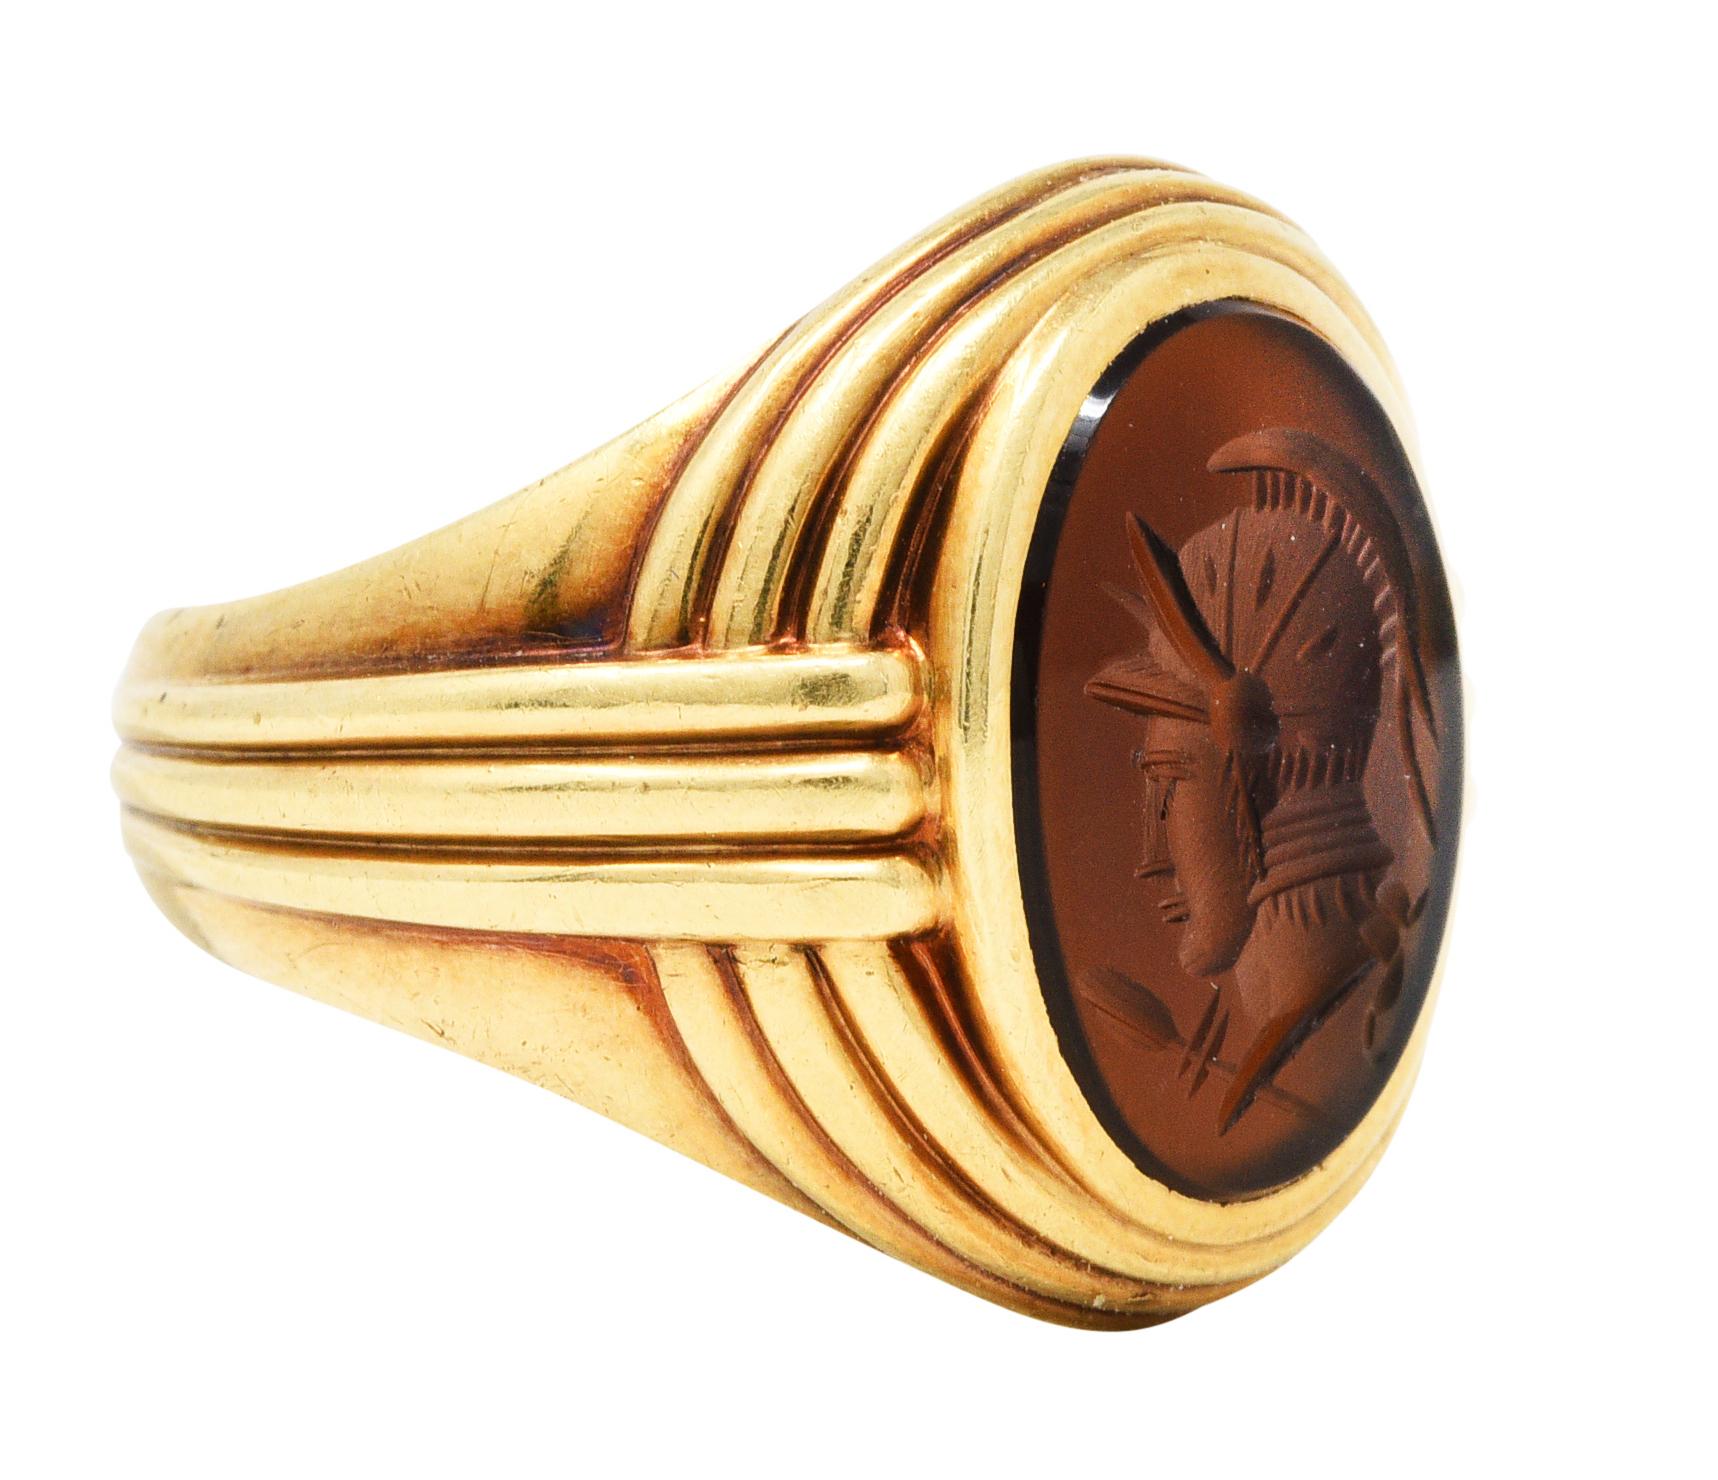 Signet style ring centers an oval intaglio of sard carnelian - measures 15.0 x 11.0 mm

Medium dark brownish red and deeply engraved to depict the profile of a Greek warrior

Bezel set in a deeply grooved mounting

Stamped 14 for 14 karat